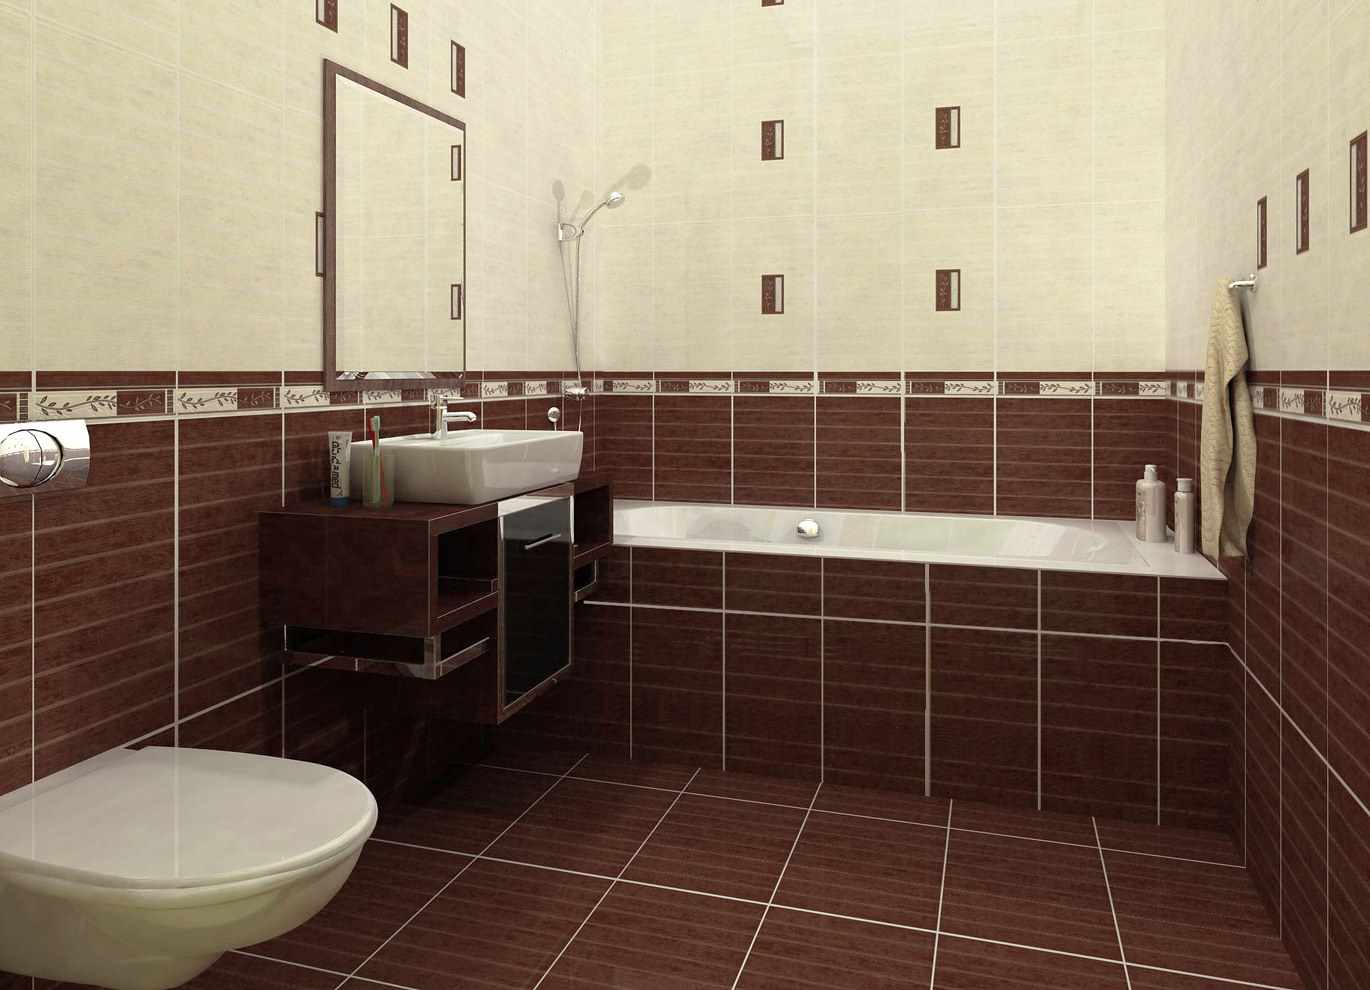 An example of a beautiful design of a bathroom with tiling